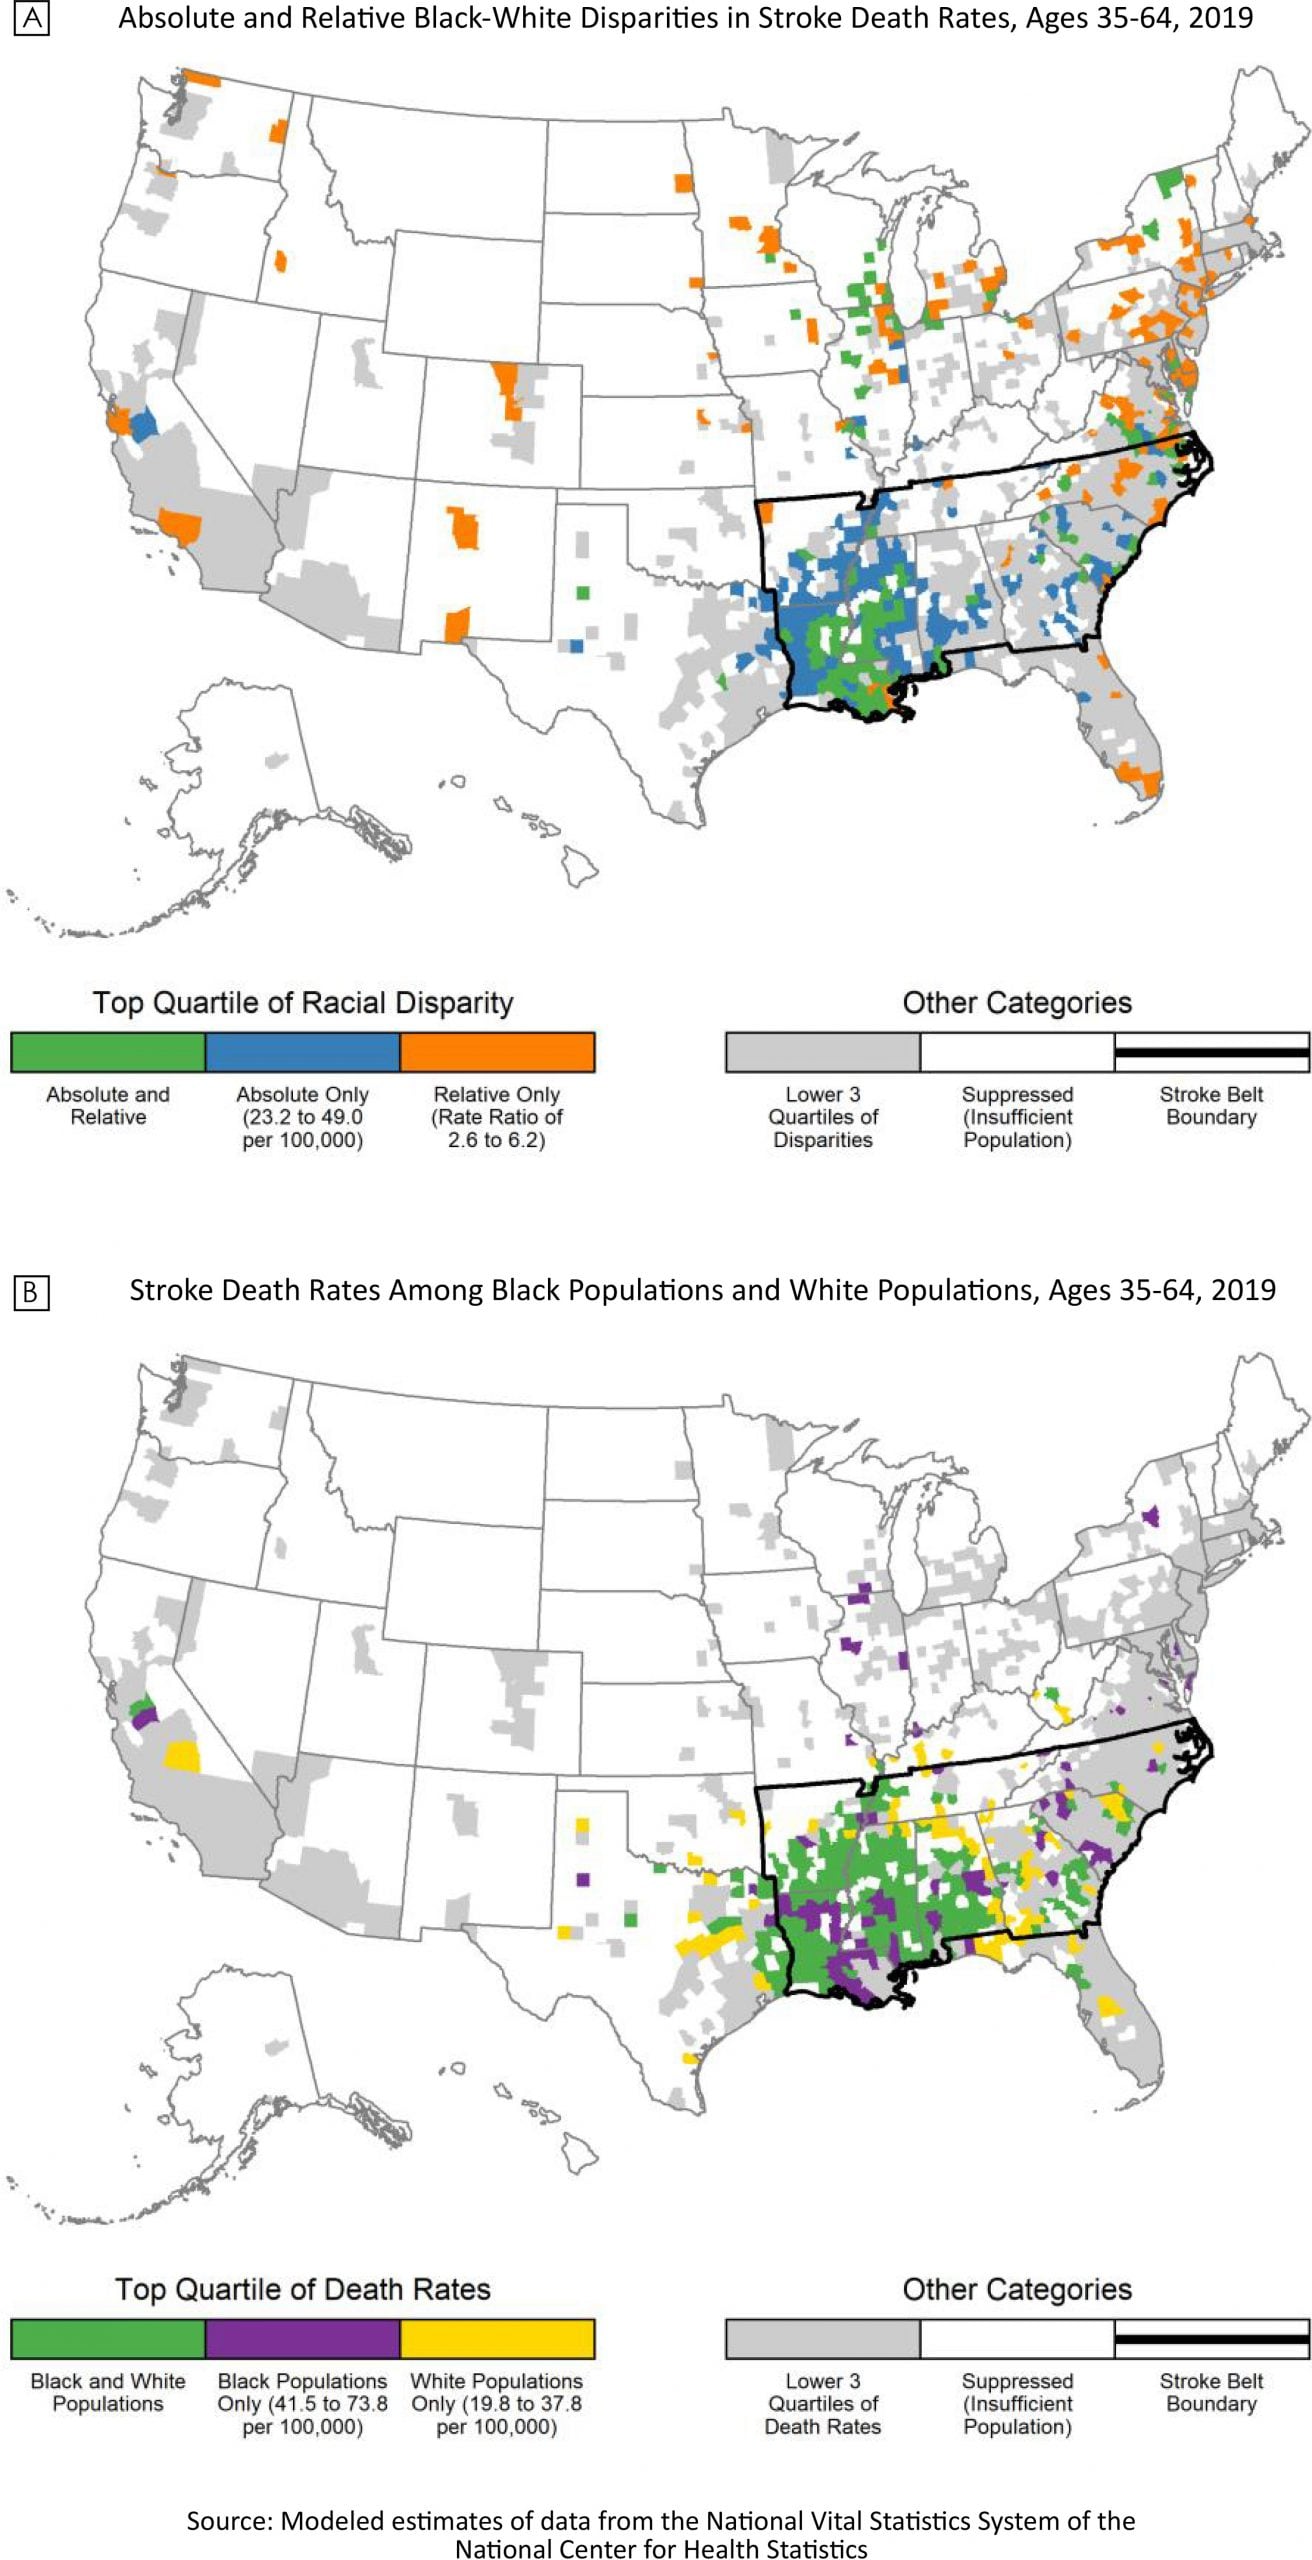 Absolute and relative Black–White disparities in stroke death rates for people aged 35 to 64 years, 2019 (Map A), and stroke death rates for Black populations and White populations for people aged 35 to 64 years, 2019 (Map B). Source: National Center for Health Statistics.